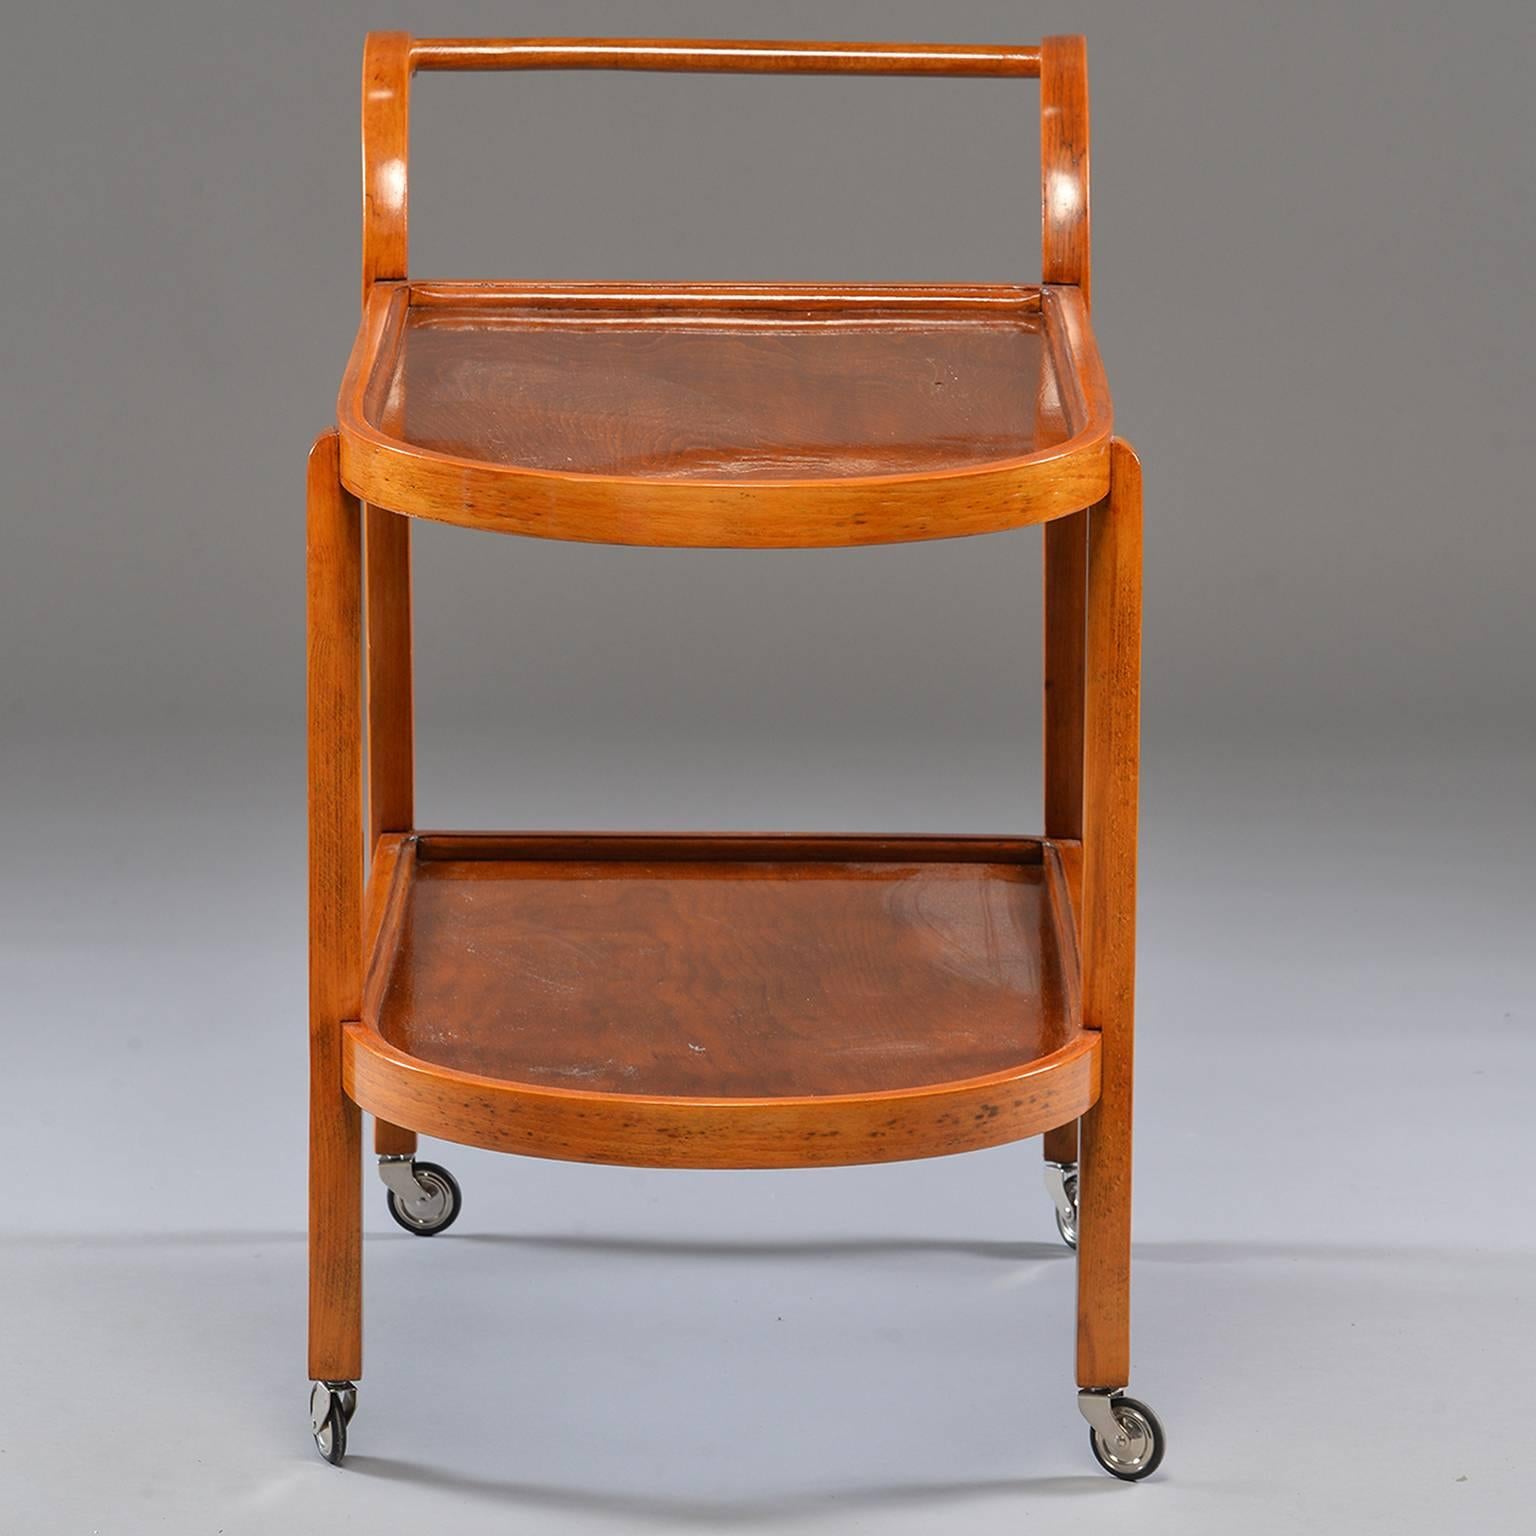 20th Century Bentwood Two-Tier Trolley or Tea Cart